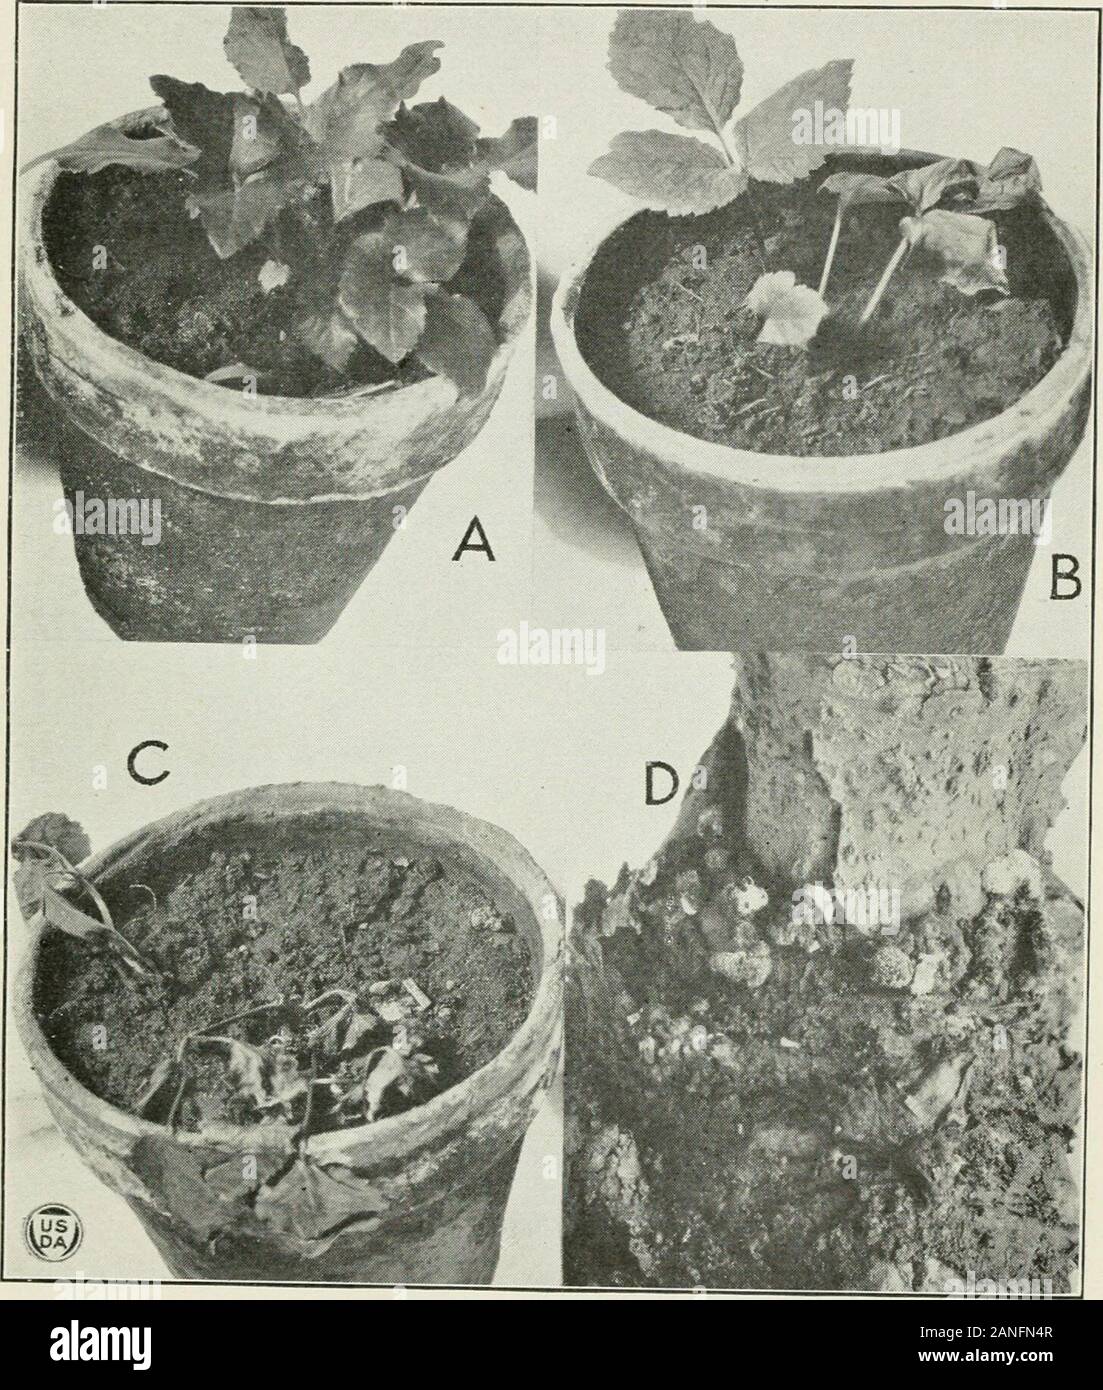 Journal of Agricultural Research . Phytopathology, v. 8, p. 15-19. (8) Lawrence, W. H. 1912. plant diseases induced by sclerotinia perplexa nov. sp. wash.Agr. Exp. Sta. Bui. 107, 22 p., 9 fig. (9) Morris, H. E., and Swingle, D. B. 1921. AN important new DISEASE OP THE CULTIVATED SUNFLOWER. (Abstract.) In Phytopathology, v. 11, p. 50. (10) Orton, W. a. 1914. THE fungus GENUS VERTICILLIUM IN ITS RELATION TO PLANT DISEASES. (Abstract.) In Phytopathology, v. 4, p. 40-41. (11) Stevens, F. L., and Hall, J. G. I911. A serious lettuce disease (SCLEROTINIOSE) AND A METHOD OP CON-TROL. N. C. Agr. Exp. S Stock Photo